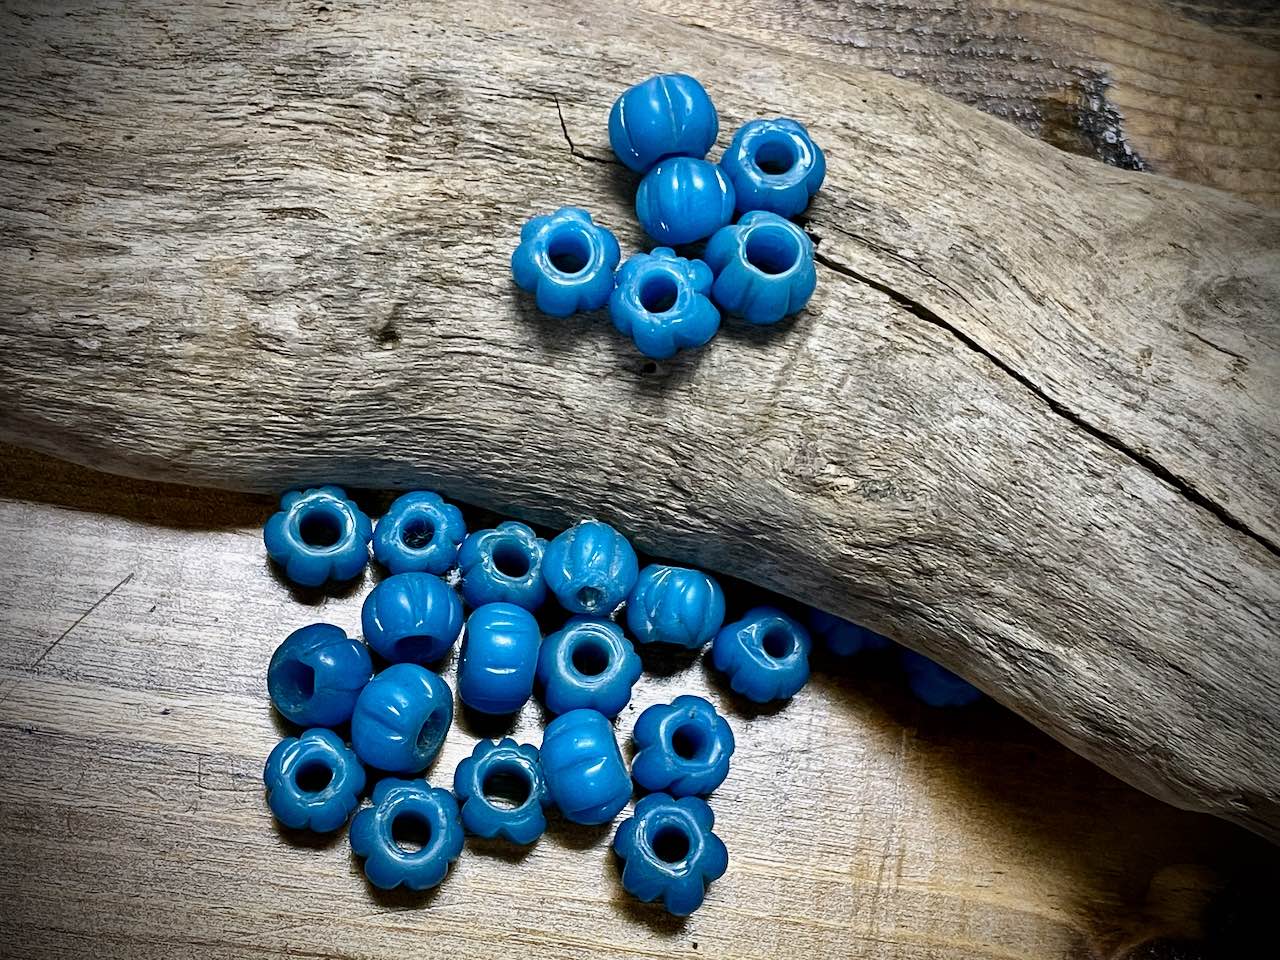 Blue Melon/Fluted Rondelle African Glass Trade Bead—8mm x 11mm